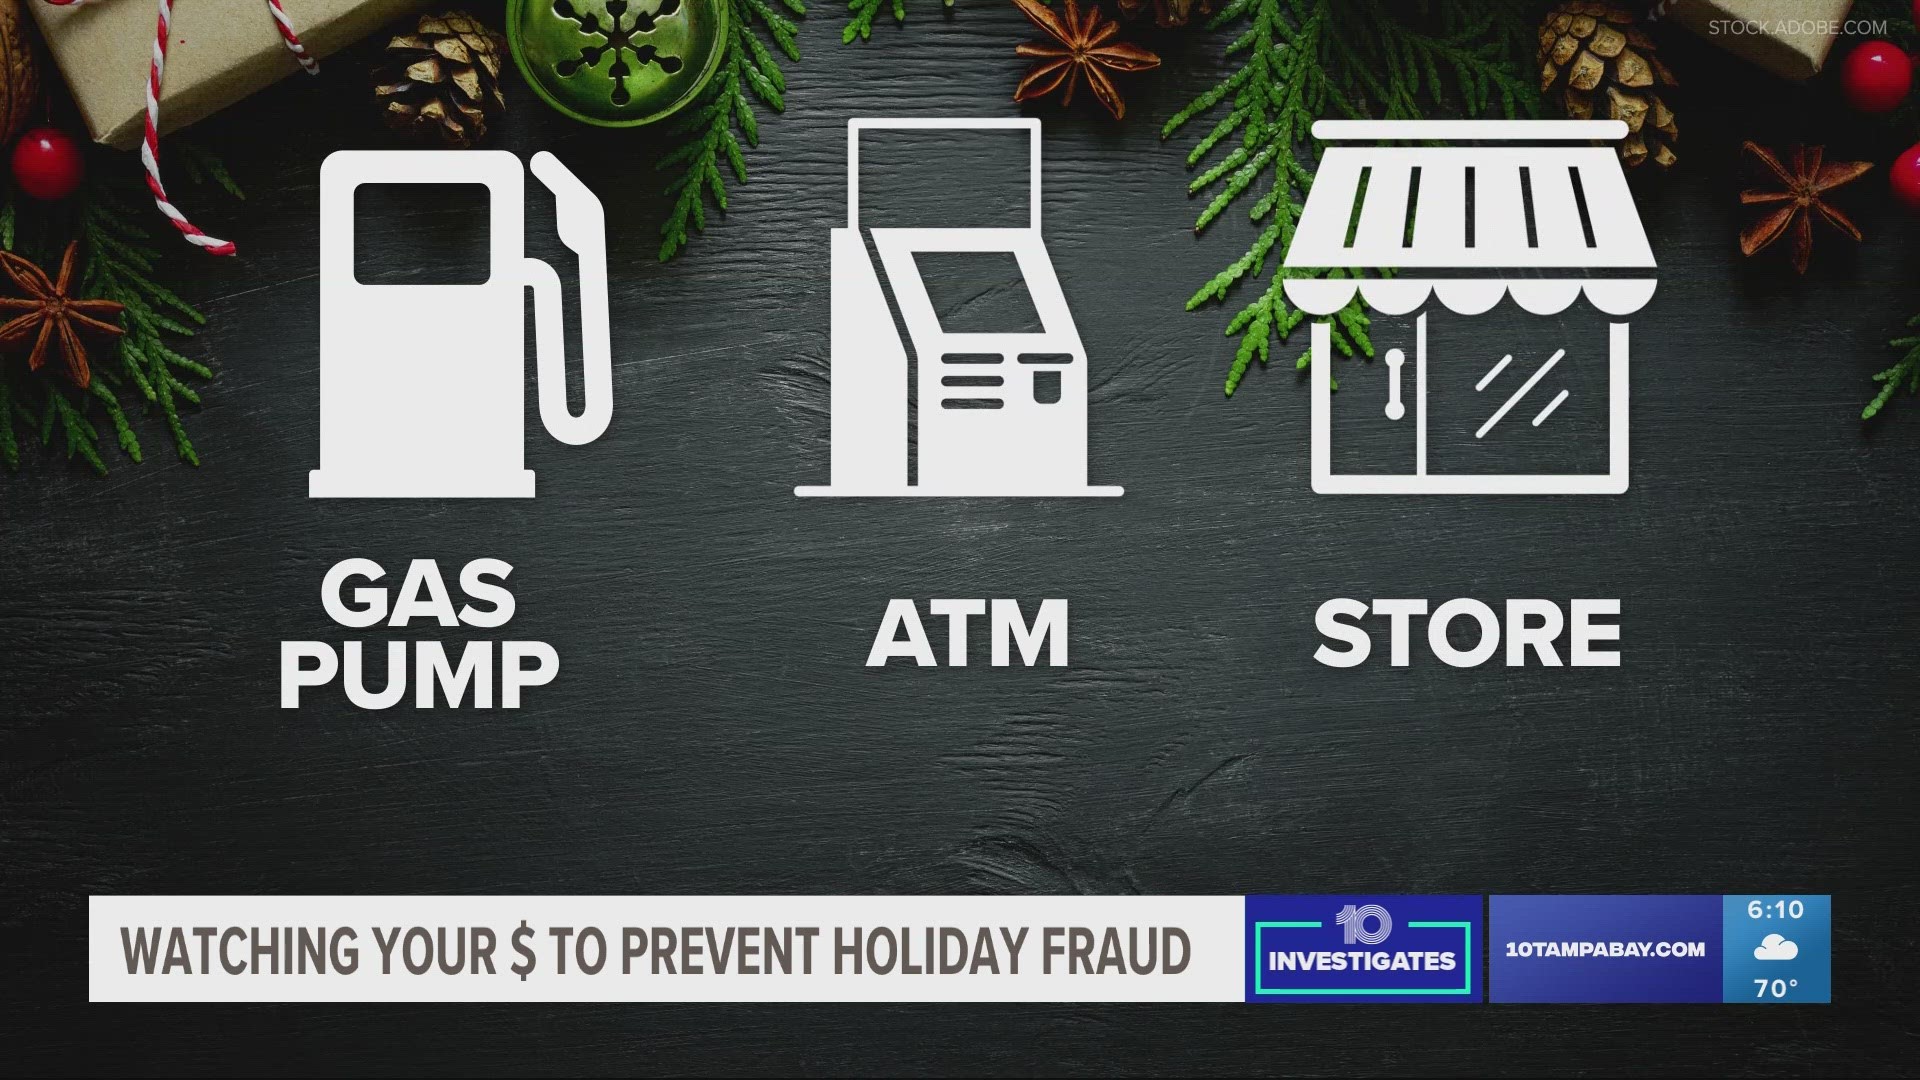 Watch Out for Card Skimming | Atlantic Union Bank